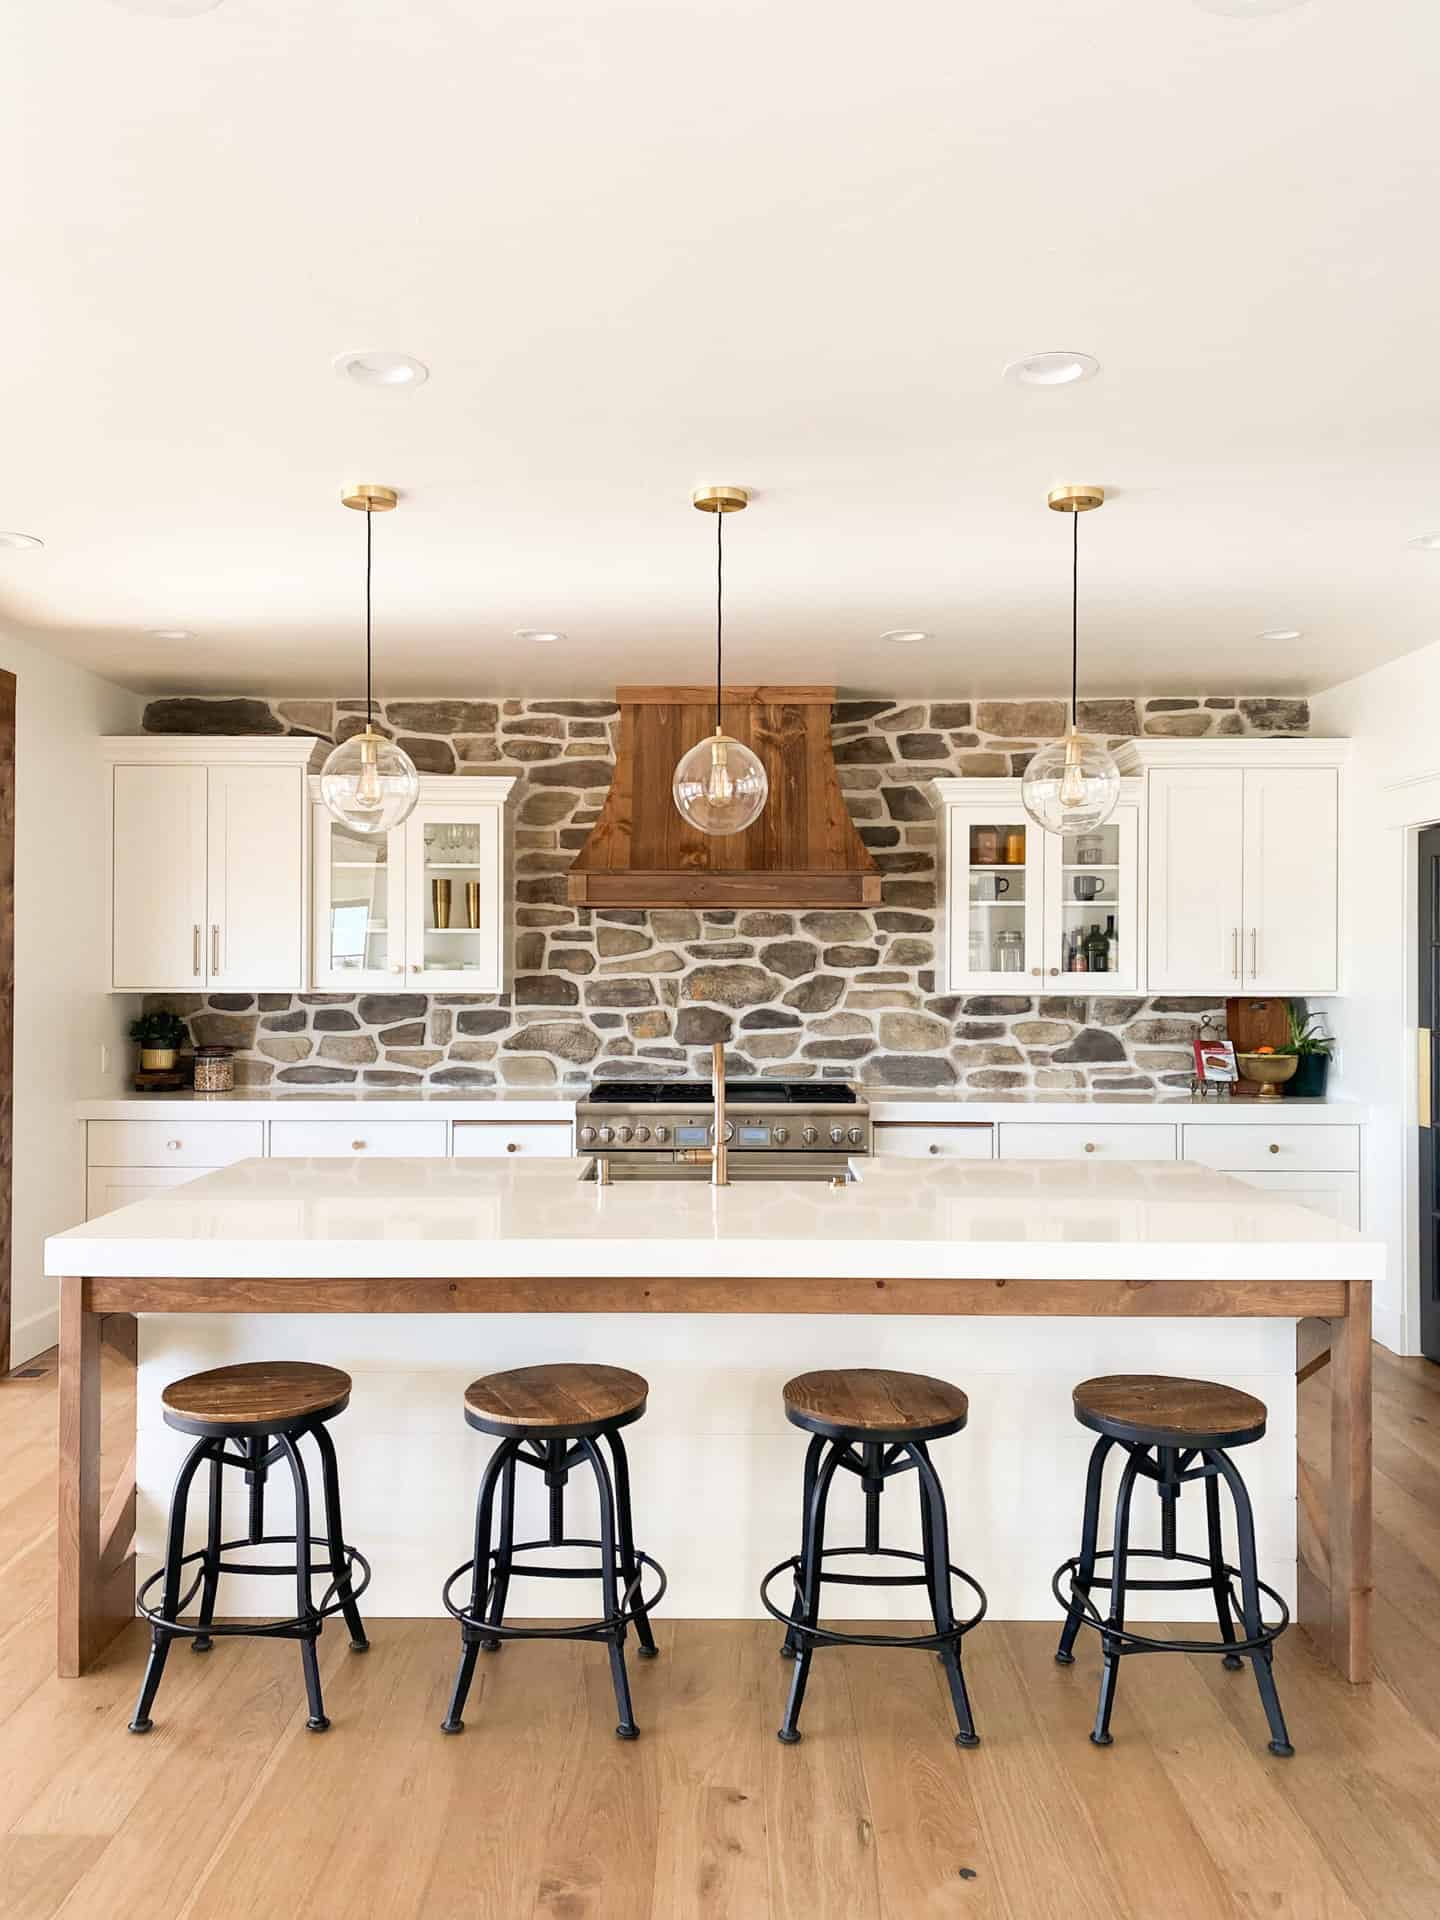 wooden vent and wooden bar stools